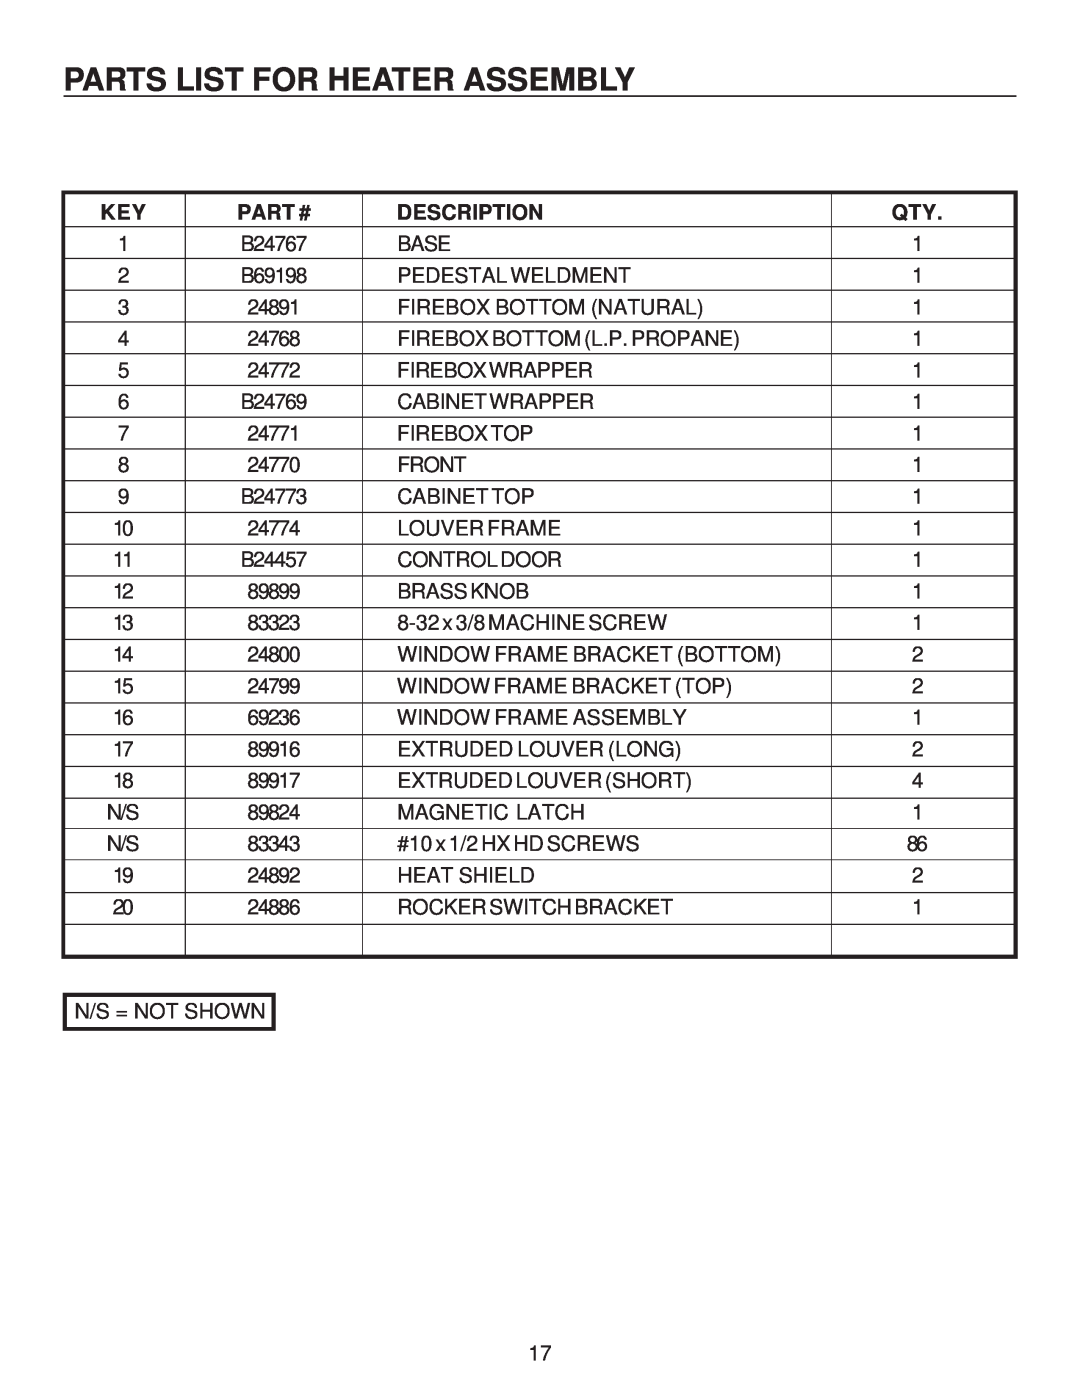 United States Stove B9945L manual Parts List For Heater Assembly, Part #, Description 